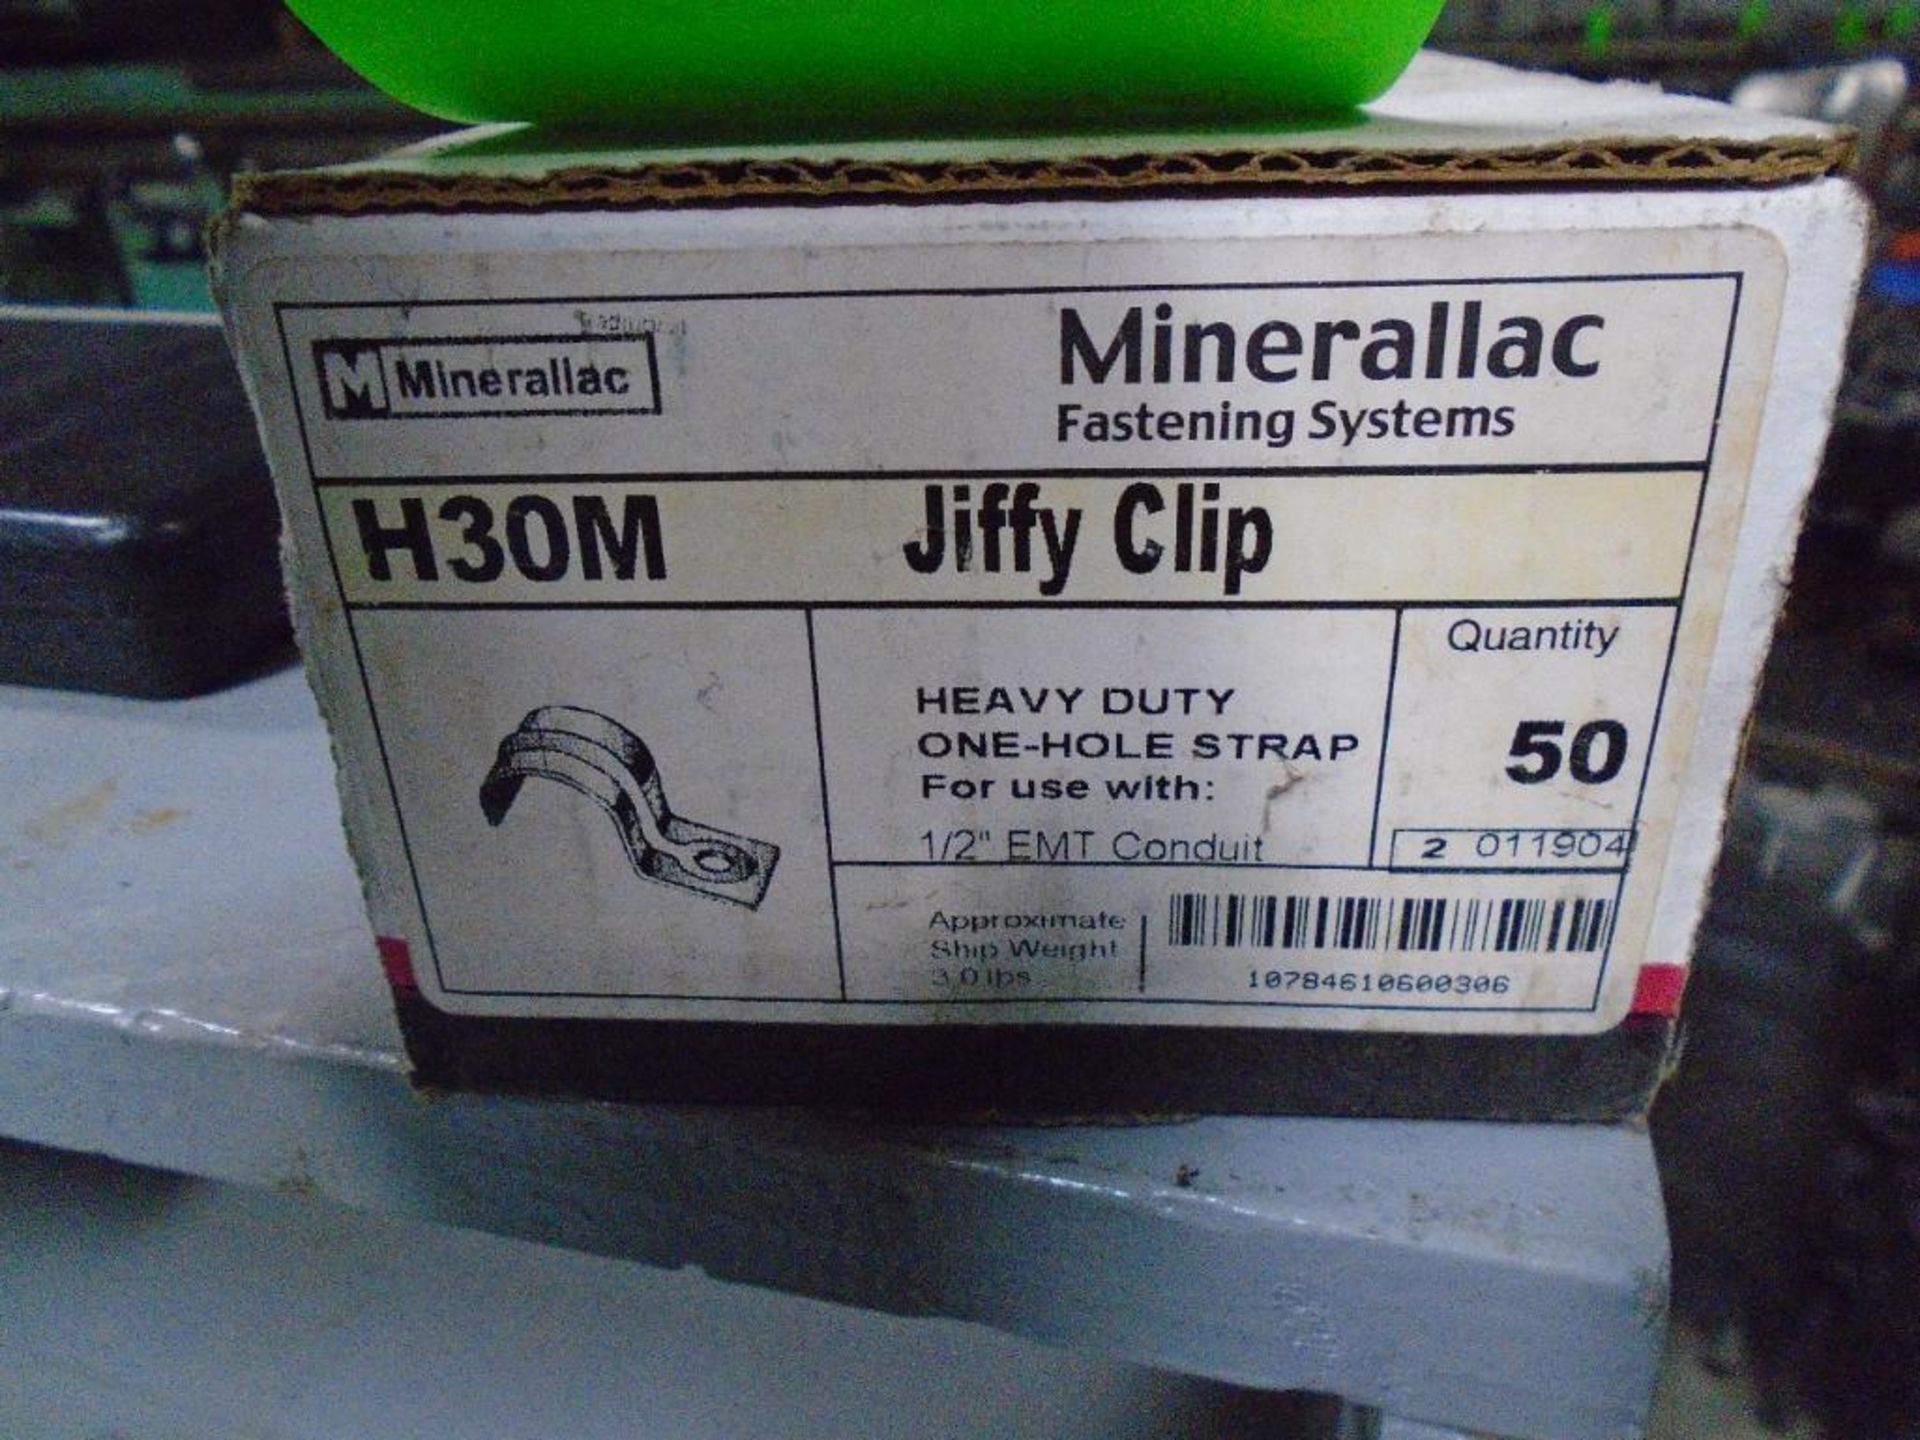 Box of Minerallac H30M Jiffy Clips - Image 2 of 3